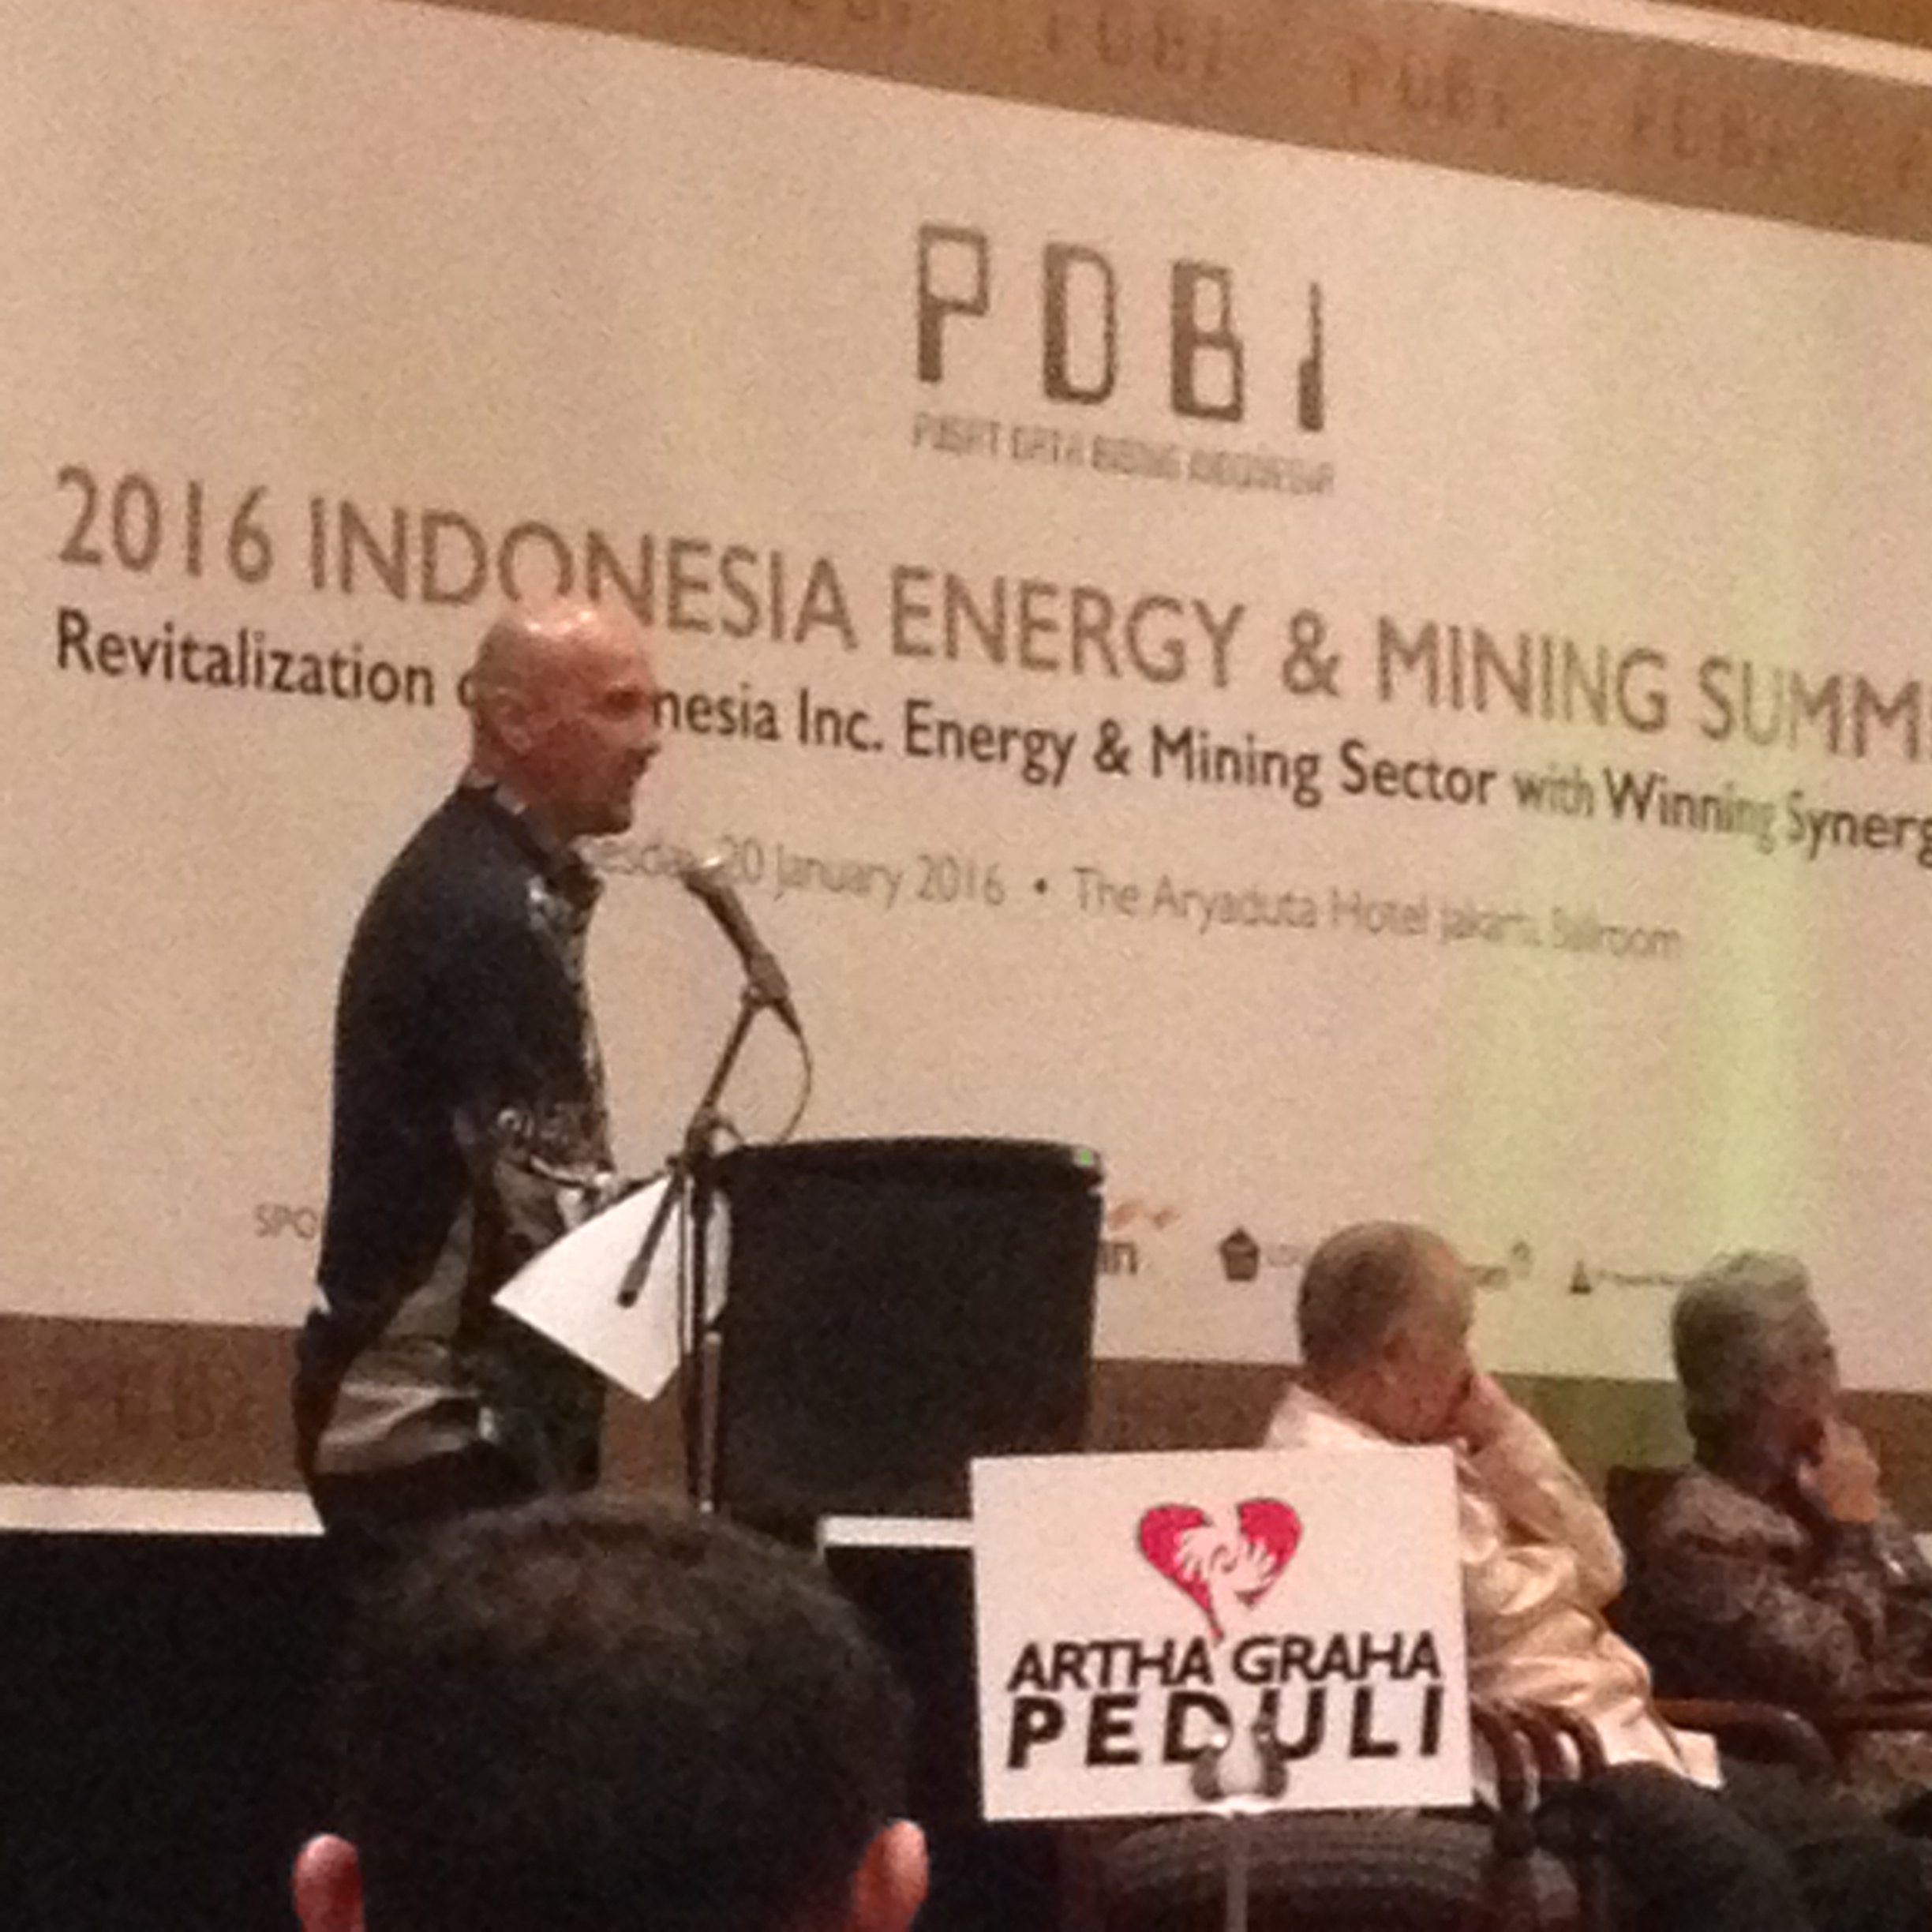 Indonesia govt to set up team to evaluate Freeport McMoran divestment offer